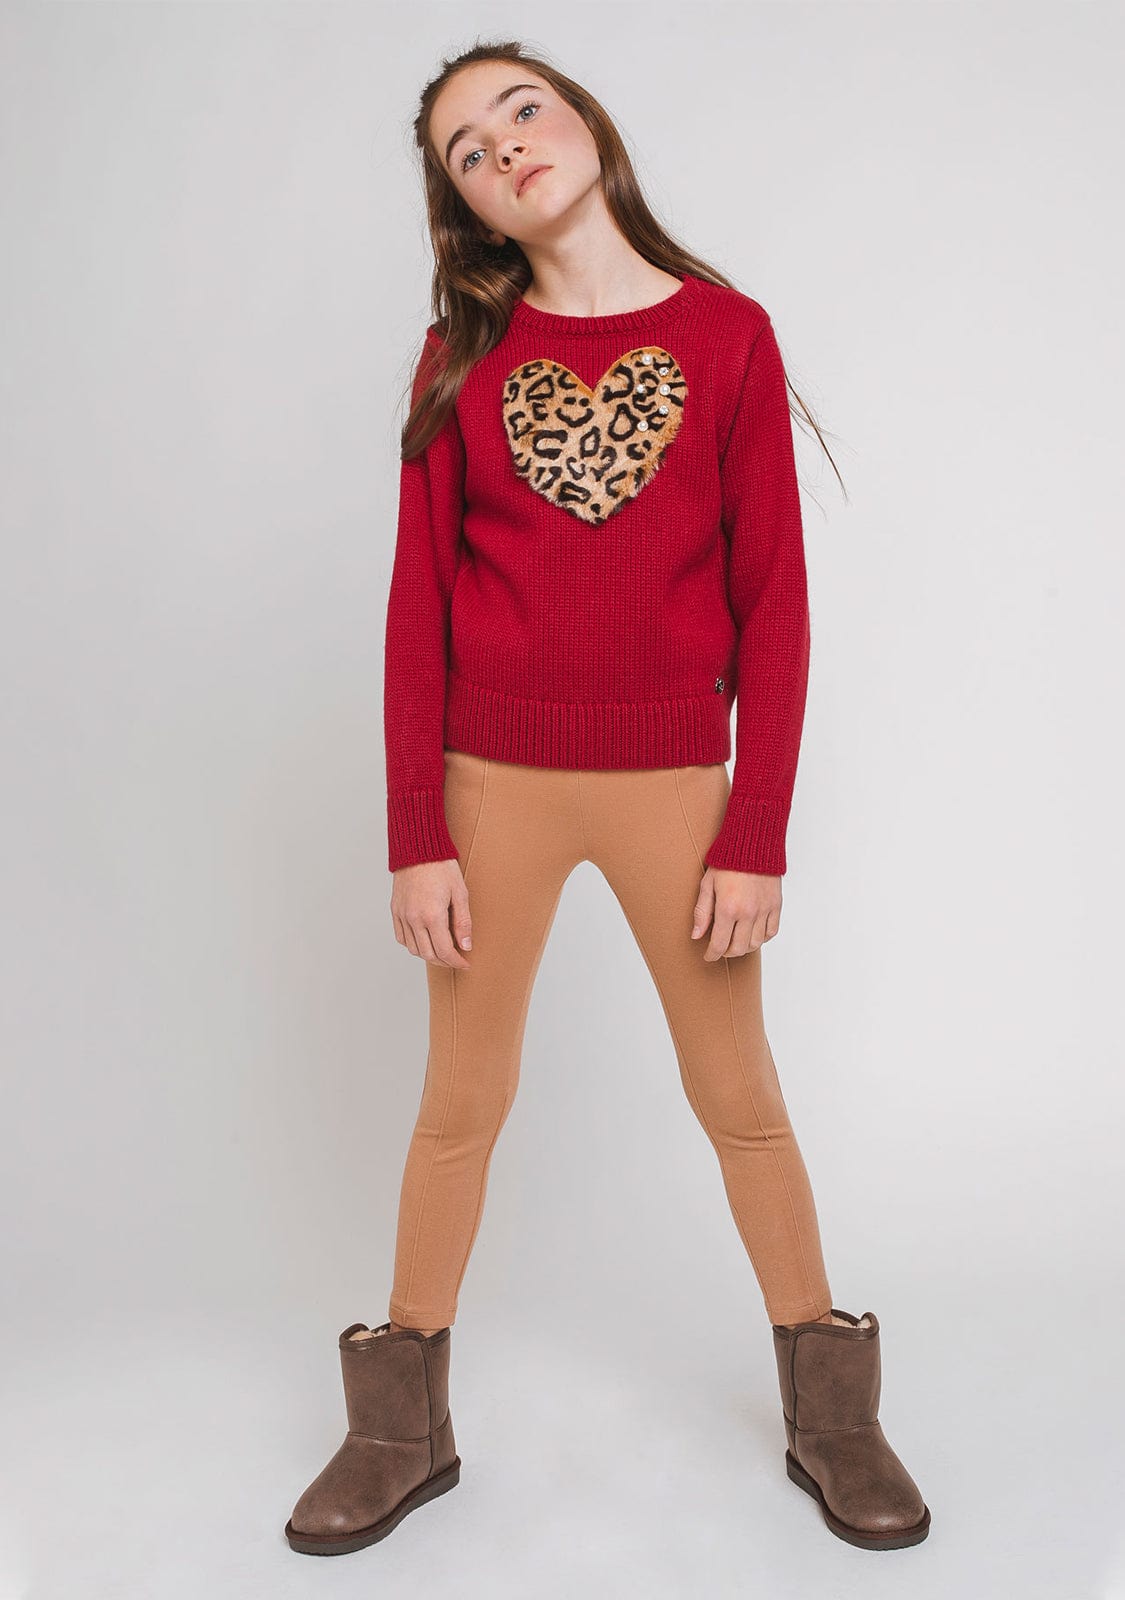 CONGUITOS TEXTIL Clothing Girl's "Leopard Heart" Red Jersey